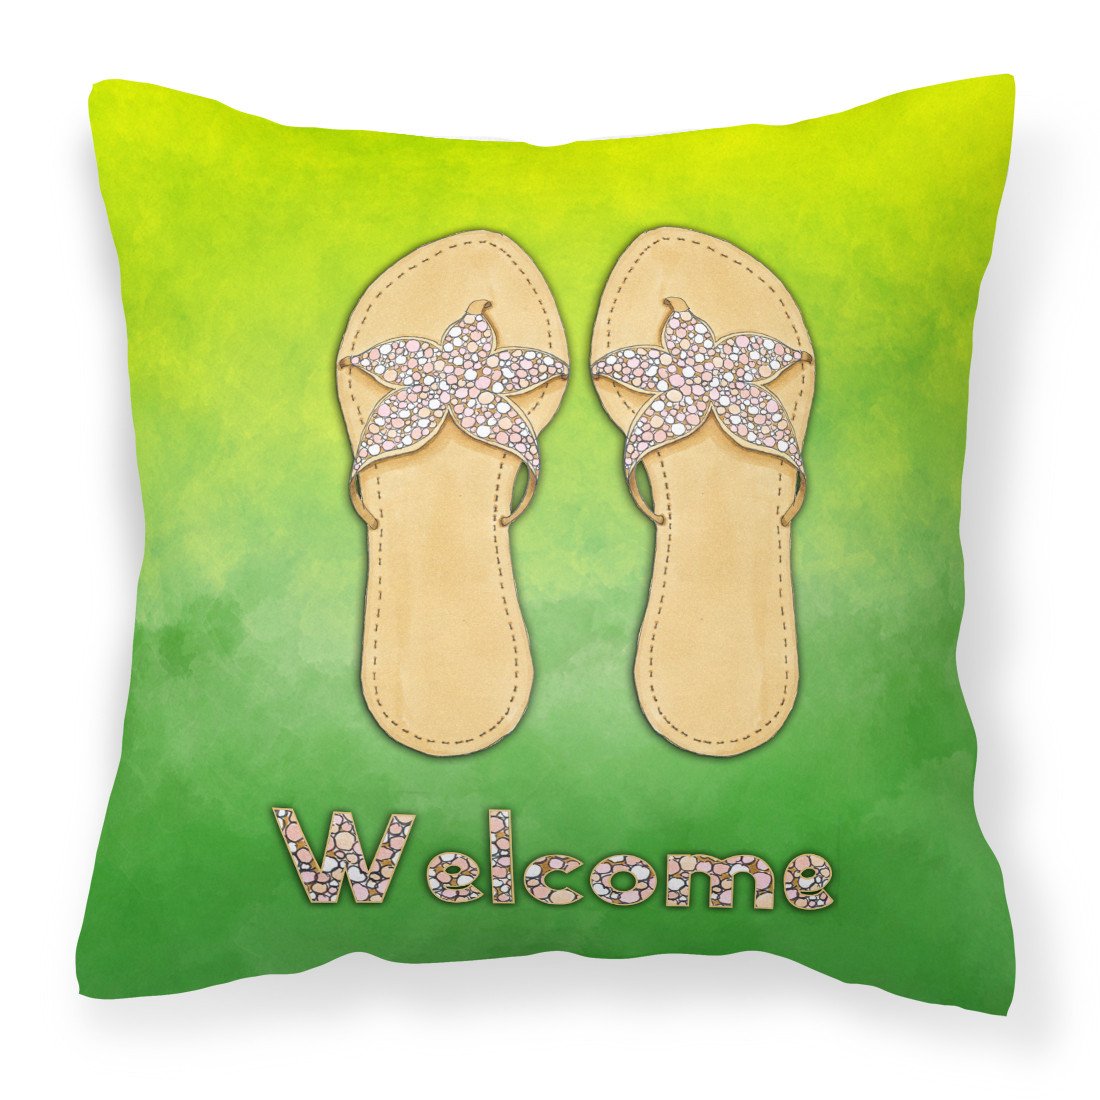 Flip Flops Welcome Fabric Decorative Pillow BB7454PW1818 by Caroline's Treasures